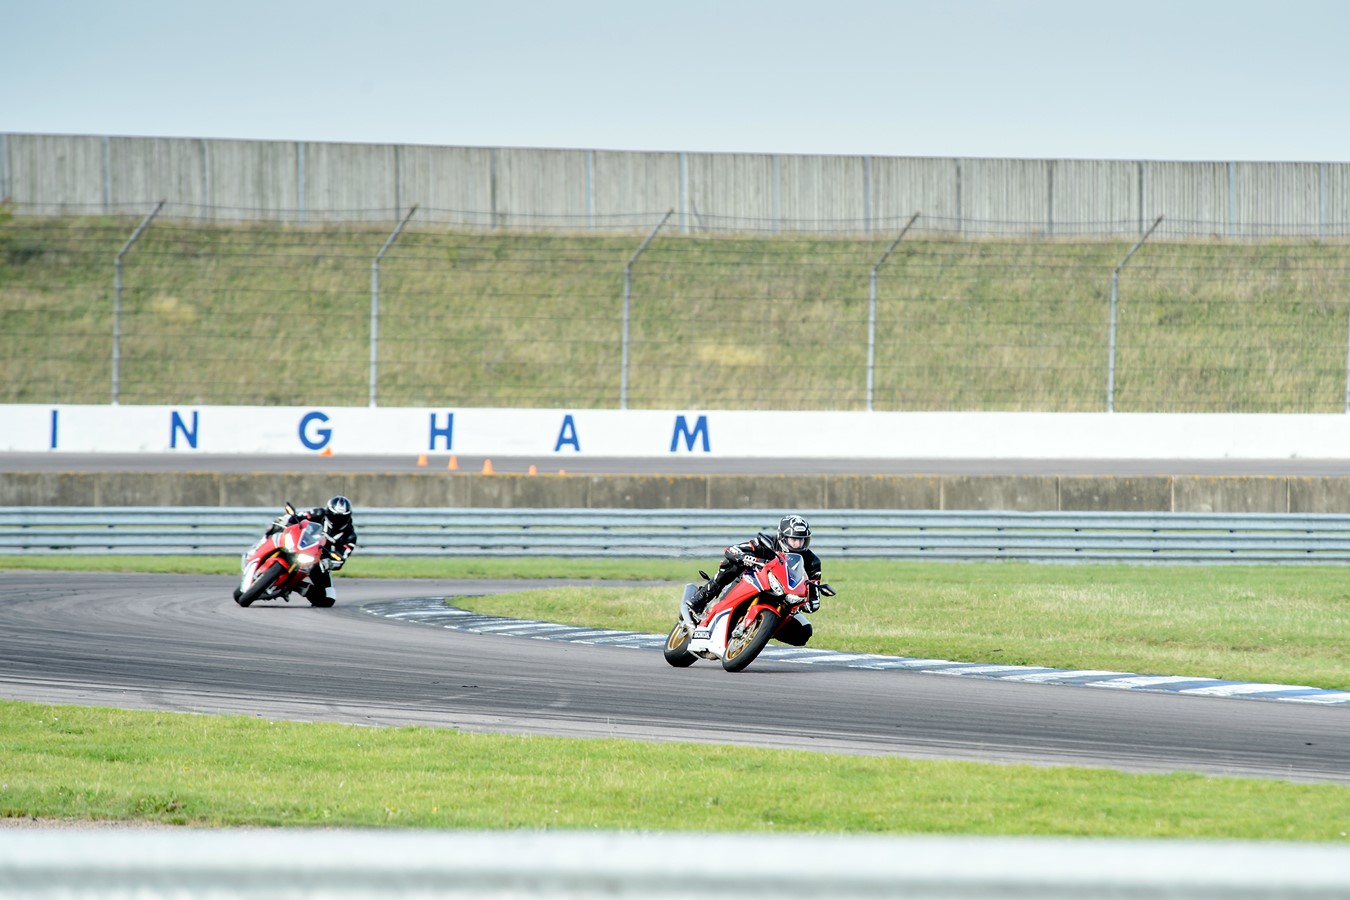 25th Anniversary Celebration of Type R and Fireblade